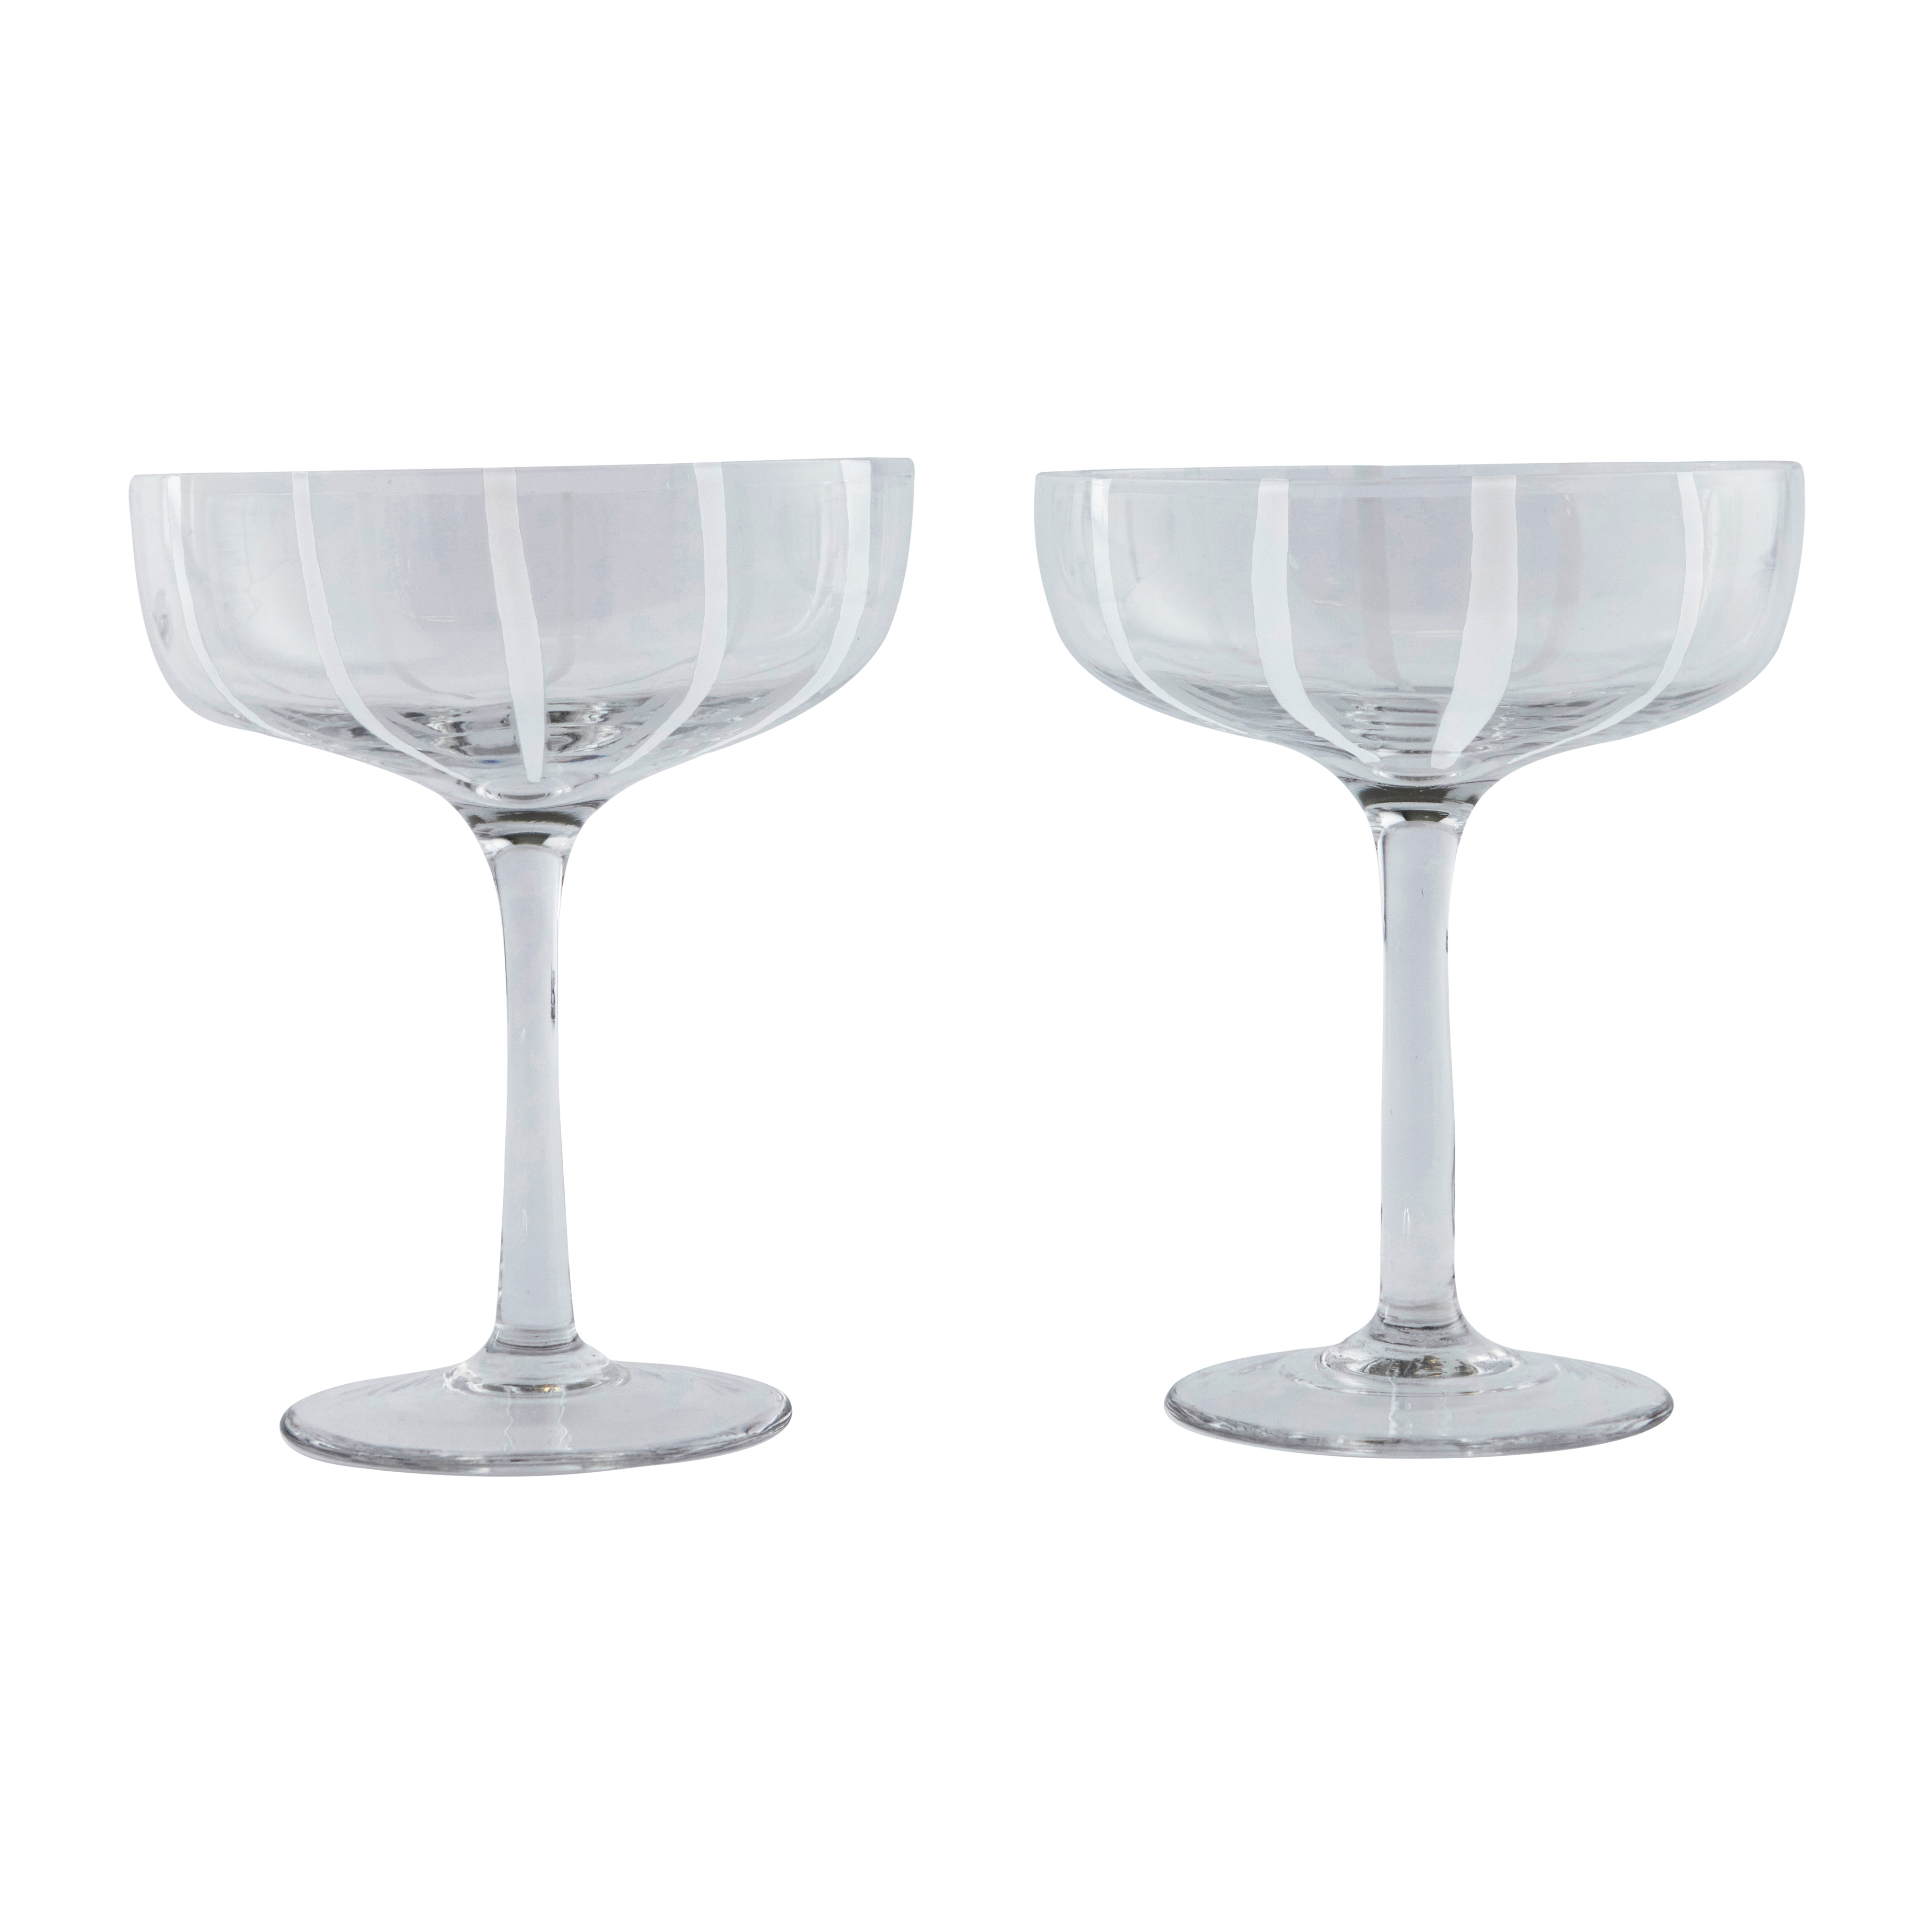 OYOY Mizu coupe champagne glass 2-pack